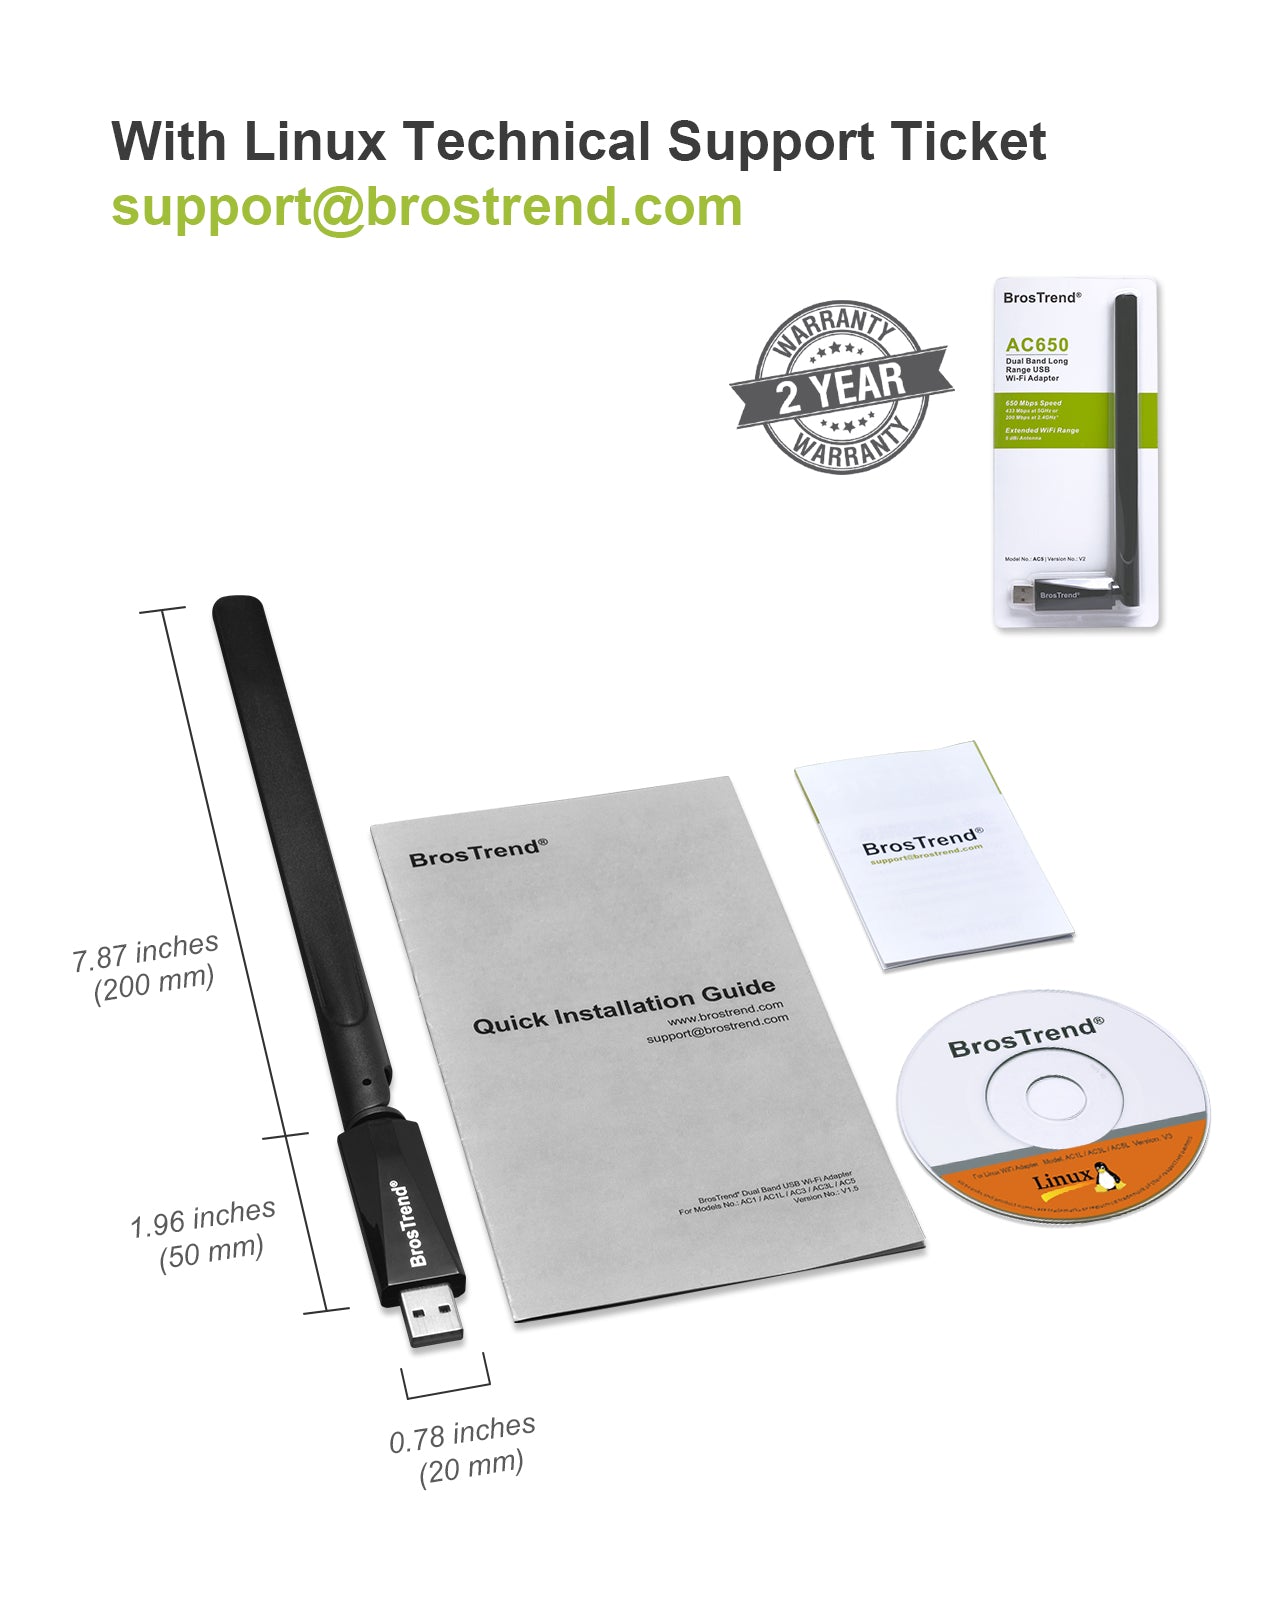 BrosTrend 650Mbps Linux WiFi Dongle Wireless Adapter For UK Market